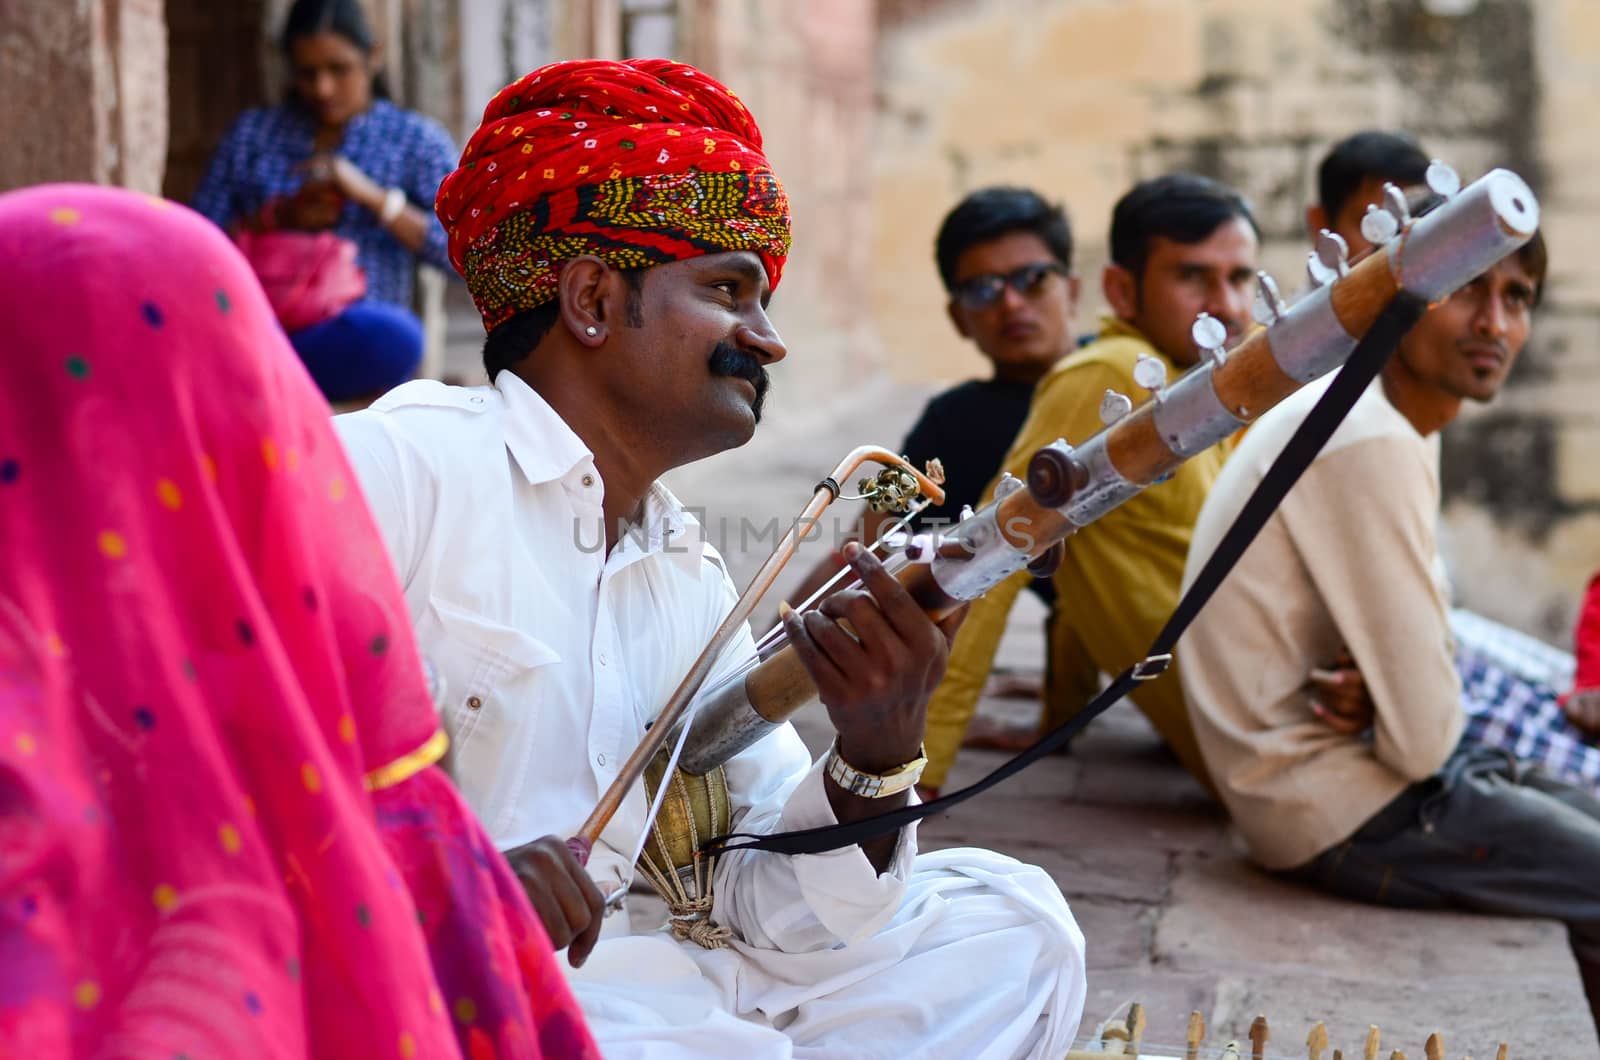 Jodhpur, Rajasthan, India, circa 2020. Sarangi player performing in his traditional dress and head gear pagdi in Rajasthan as tourists enjoys his performance in Mehrangarh Fort. by jayantbahel